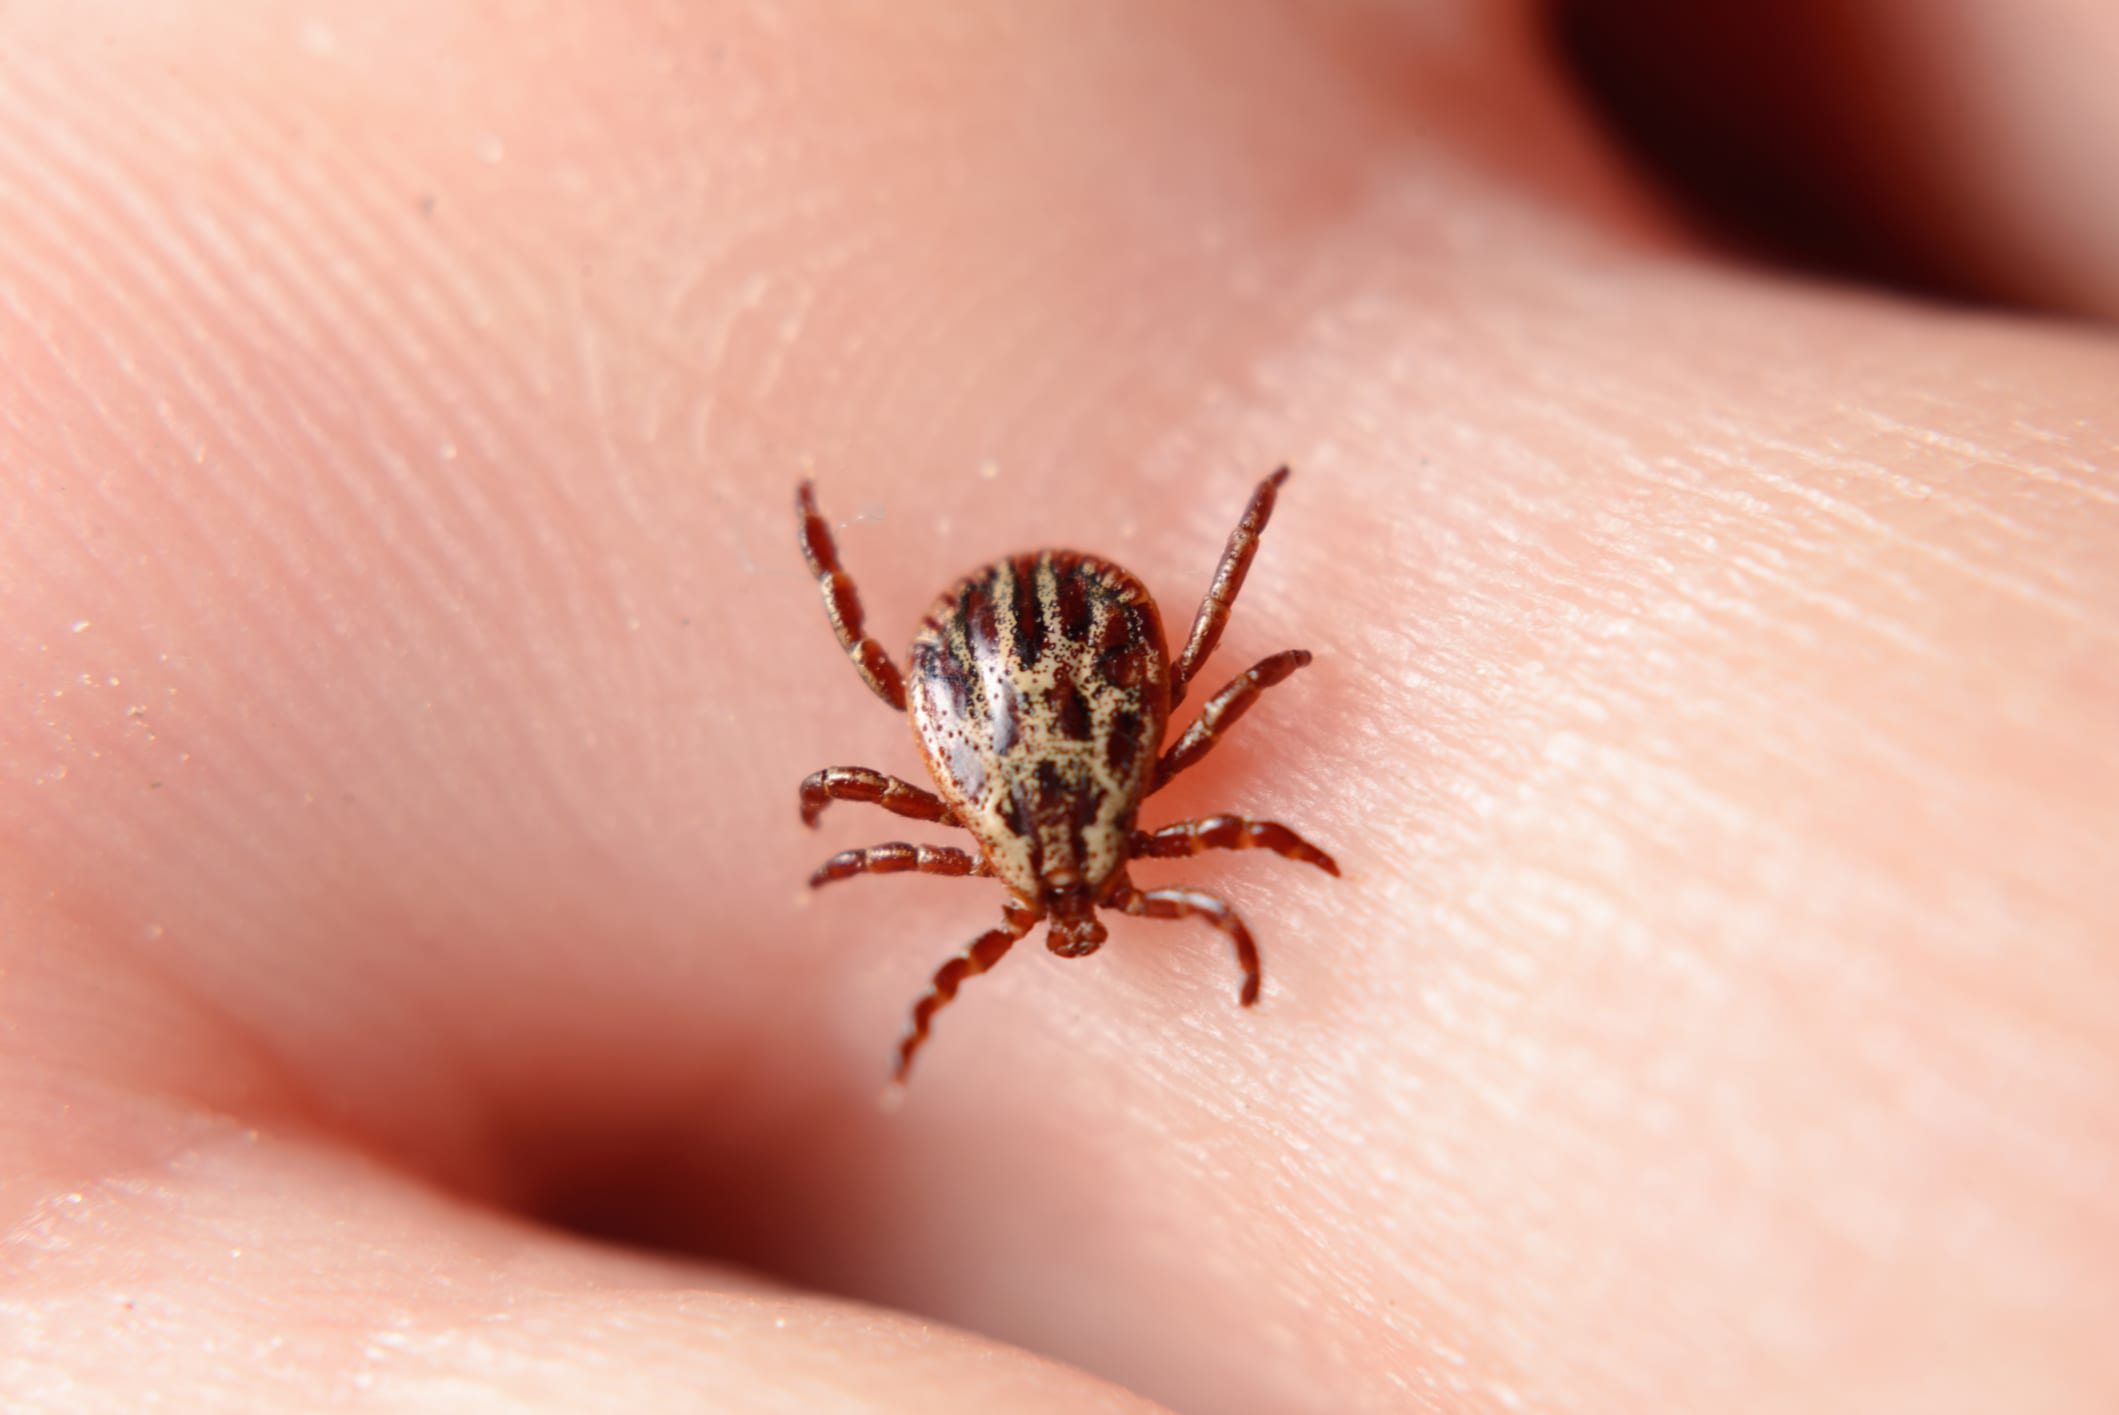 wood tick on the skin of hands. wood tick